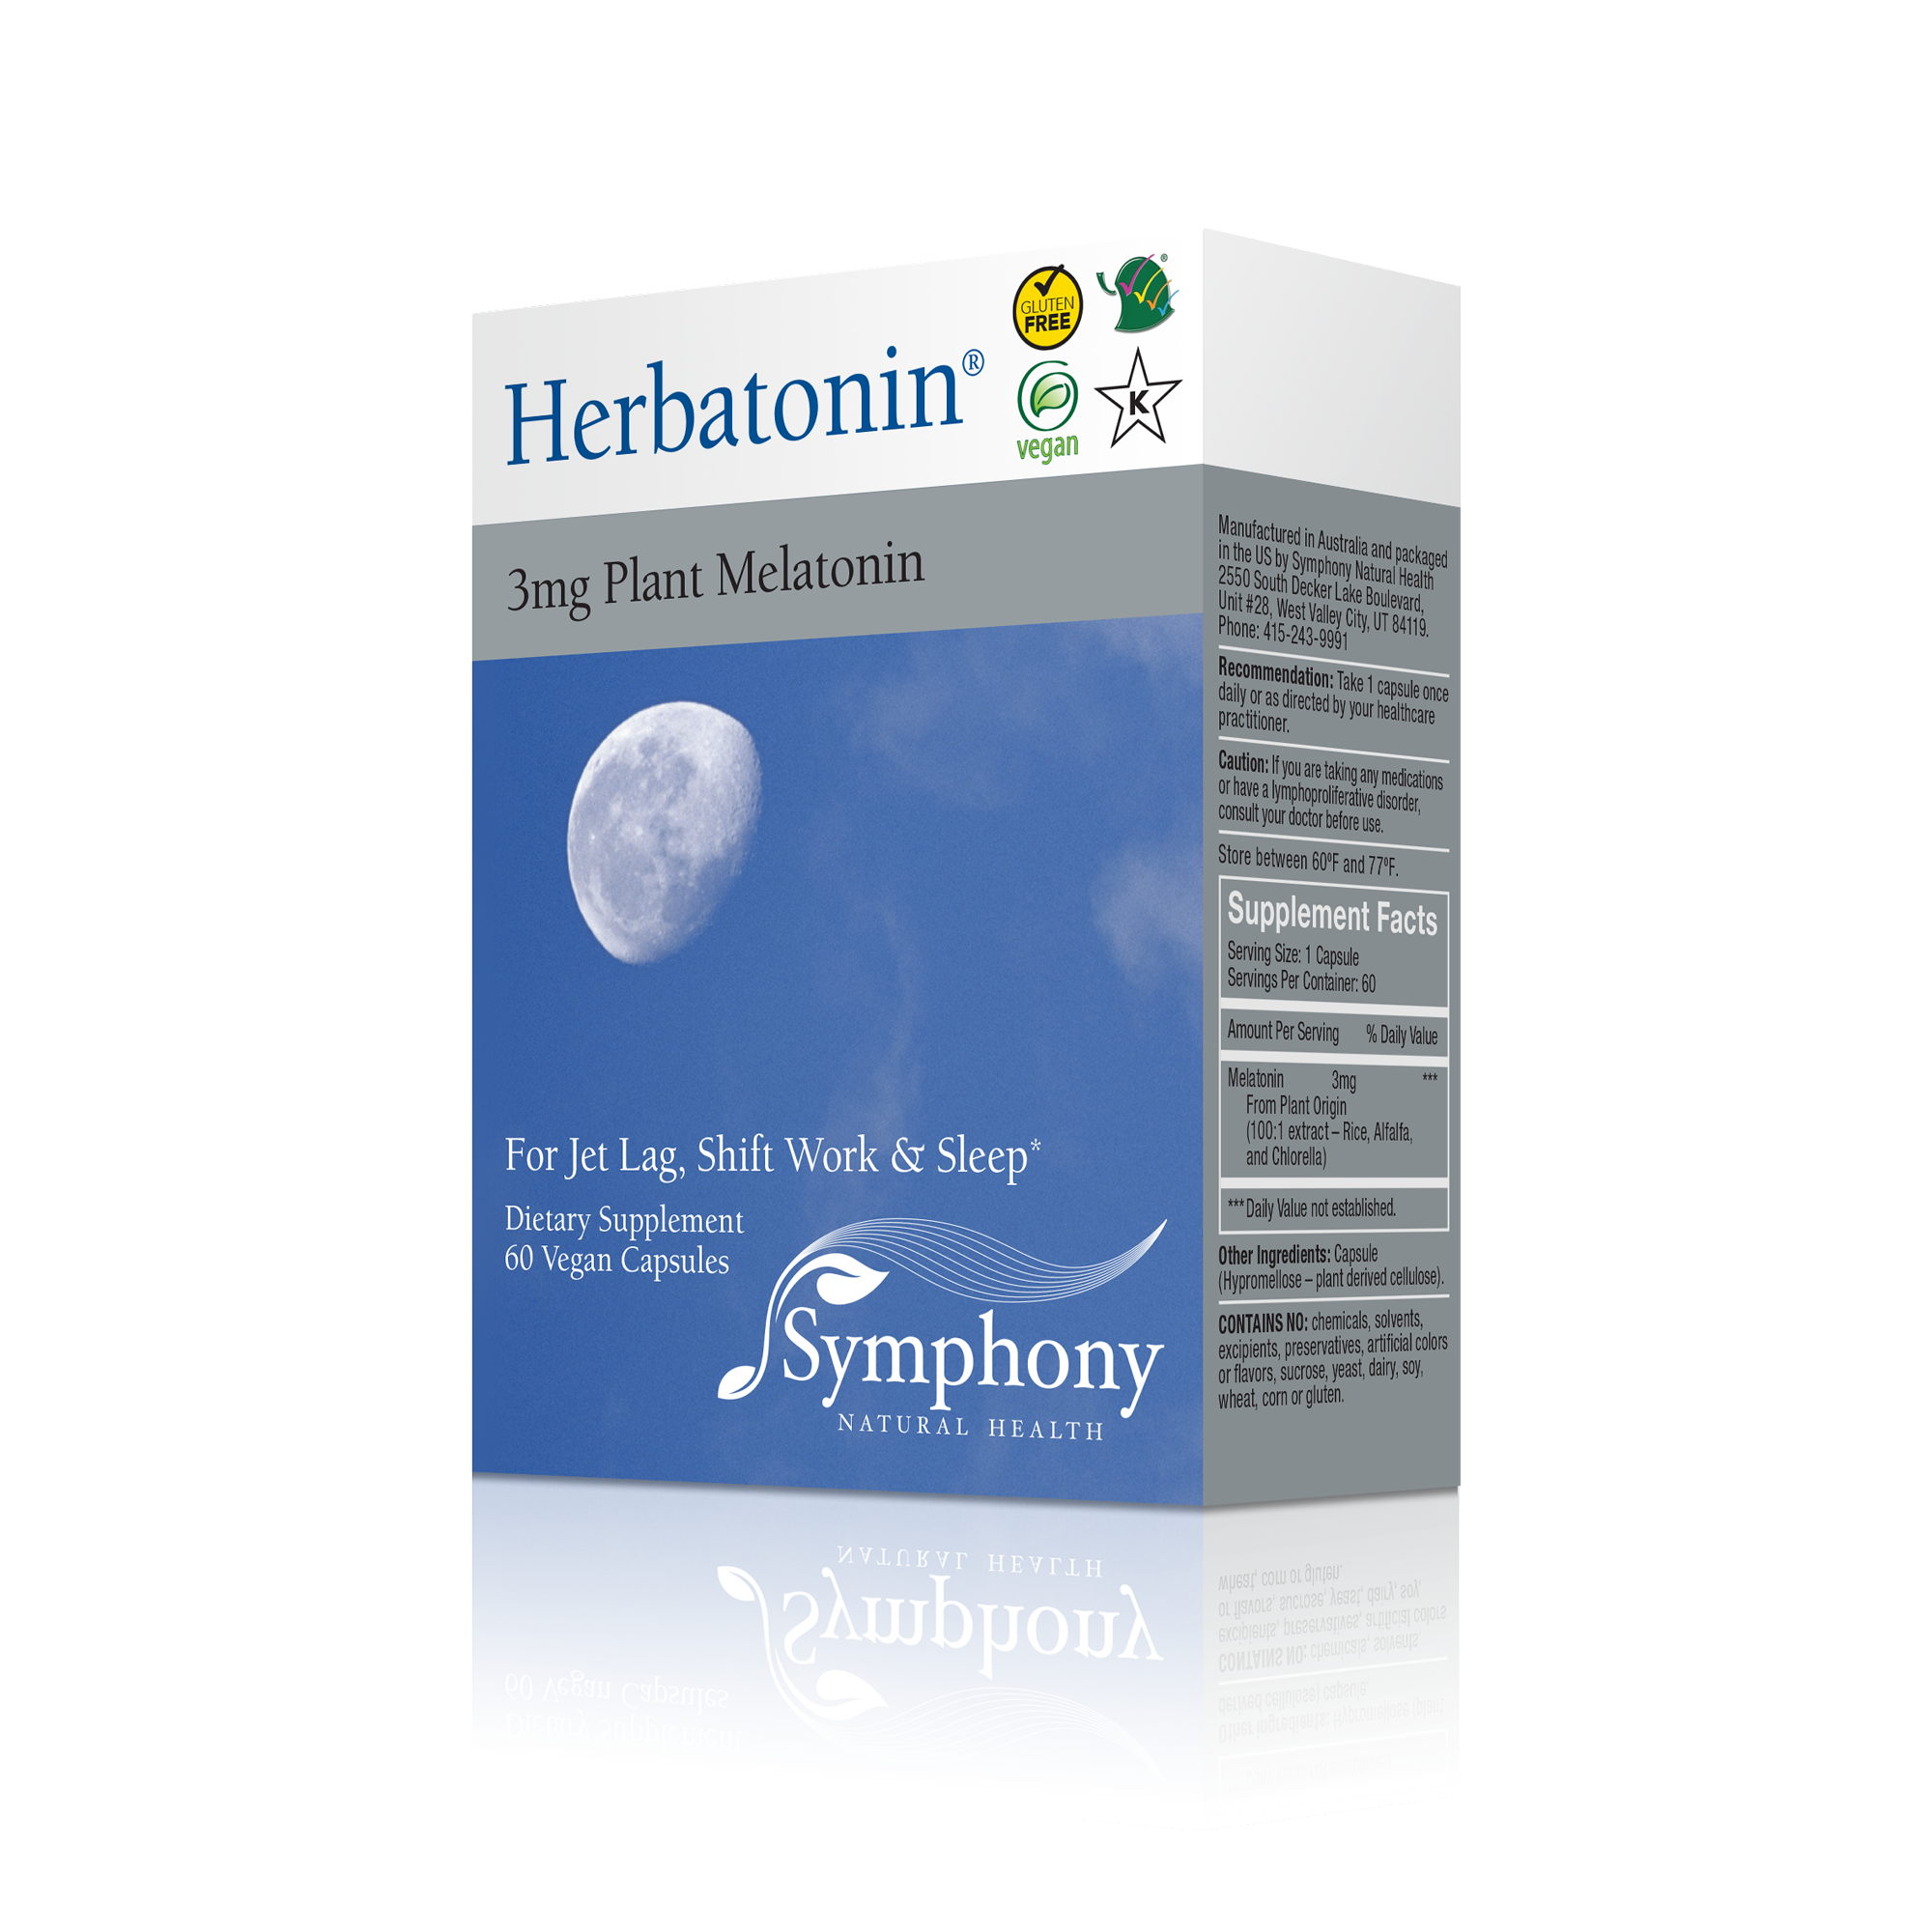 Herbatonin 3mg left-facing front and side of product box Herbatonin blue logo on black background, moon in daylight blue sky and clouds, gluten free, vegan and Kosher logos, symphony logo, supplements facts,  recommendation, caution, supplement facts, manufactured in Australia